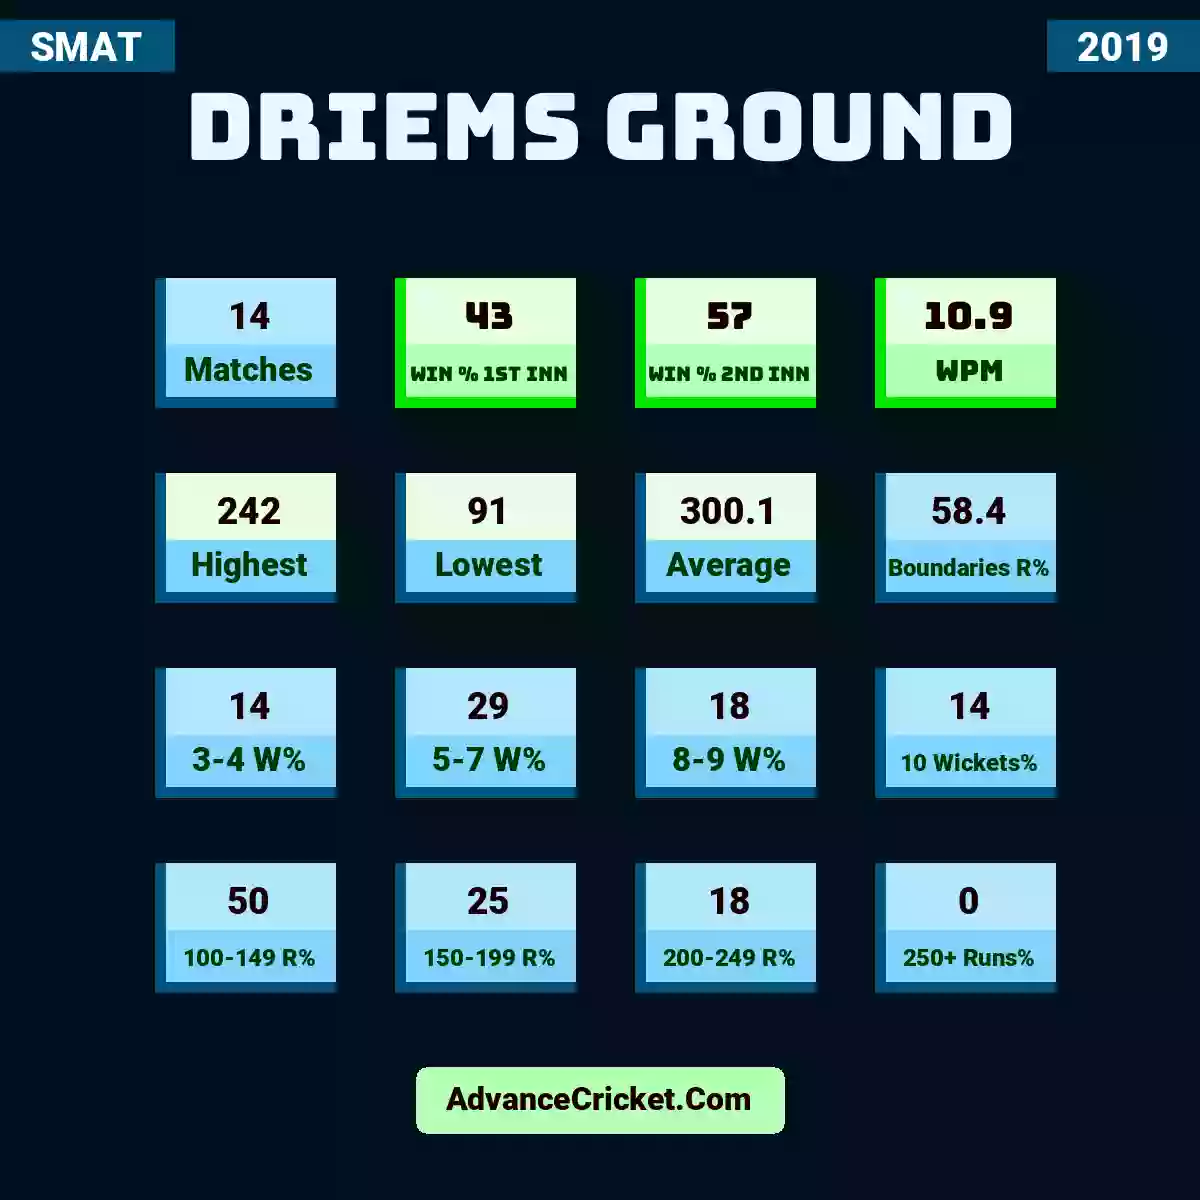 Image showing DRIEMS Ground with Matches: 14, Win % 1st Inn: 43, Win % 2nd Inn: 57, WPM: 10.9, Highest: 242, Lowest: 91, Average: 300.1, Boundaries R%: 58.4, 3-4 W%: 14, 5-7 W%: 29, 8-9 W%: 18, 10 Wickets%: 14, 100-149 R%: 50, 150-199 R%: 25, 200-249 R%: 18, 250+ Runs%: 0.